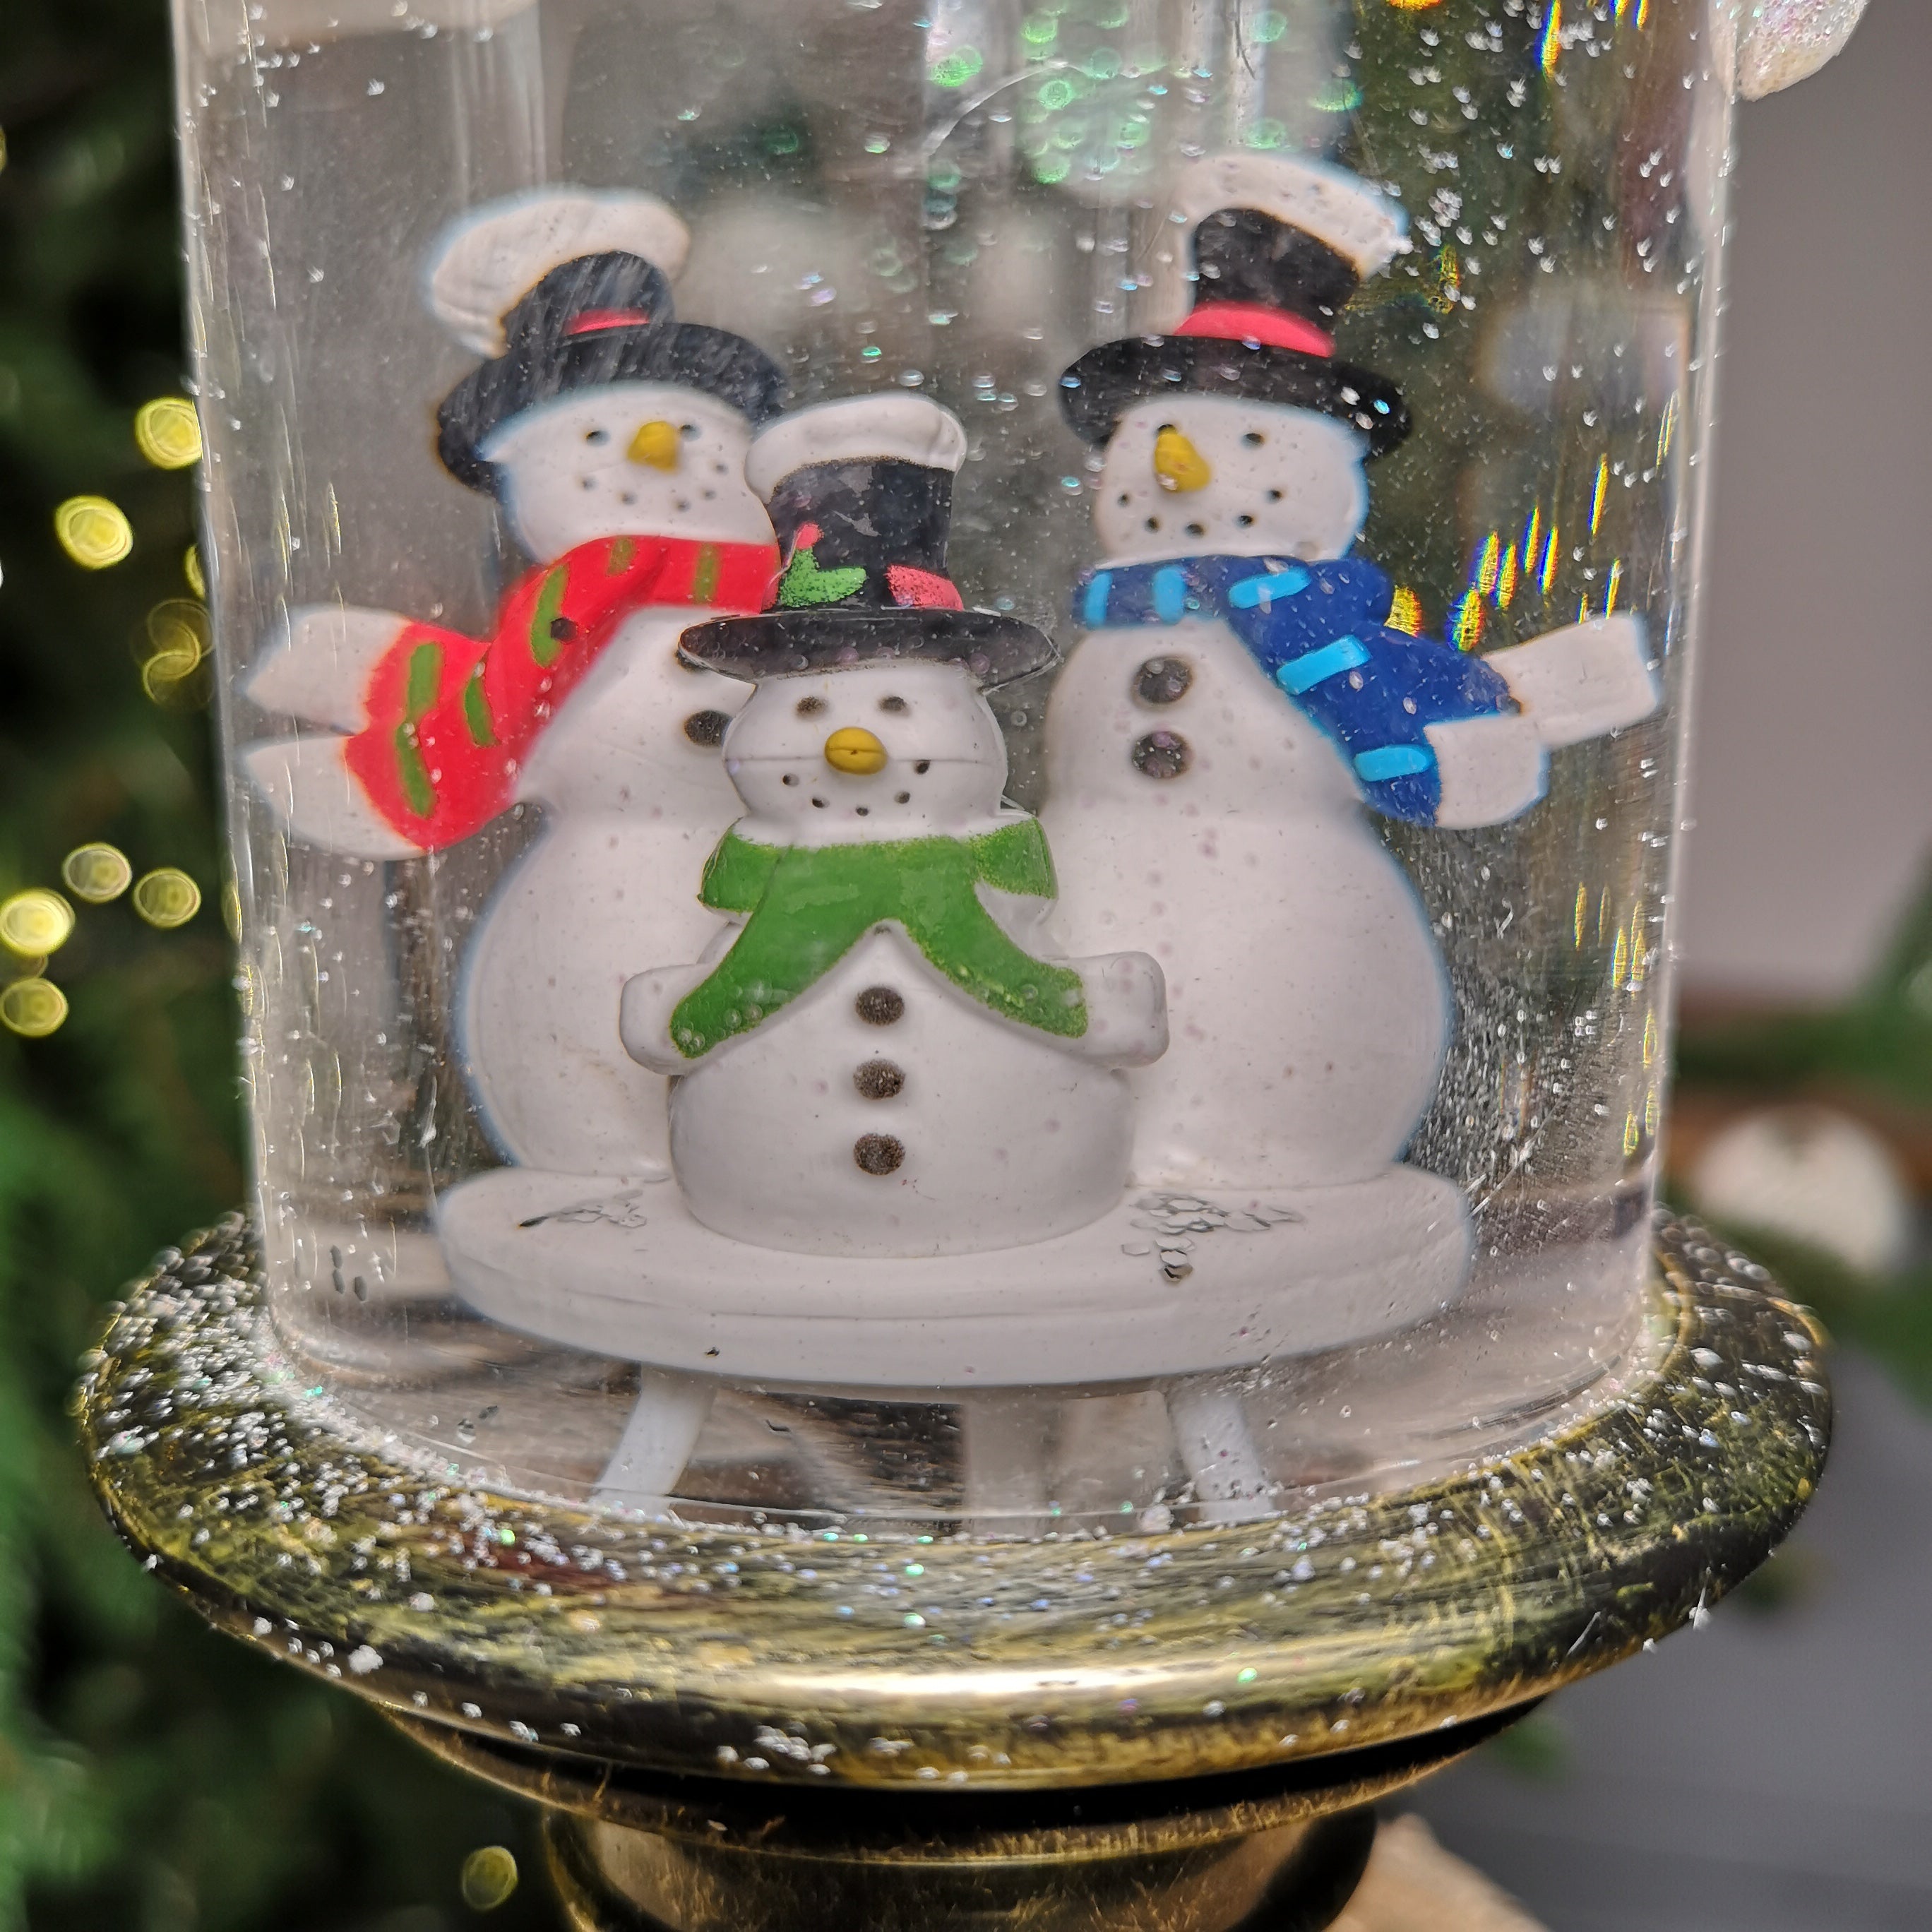 25cm Snowtime Indoor Battery Operated LED Water Candle Stick Spinner with Snowman Scene